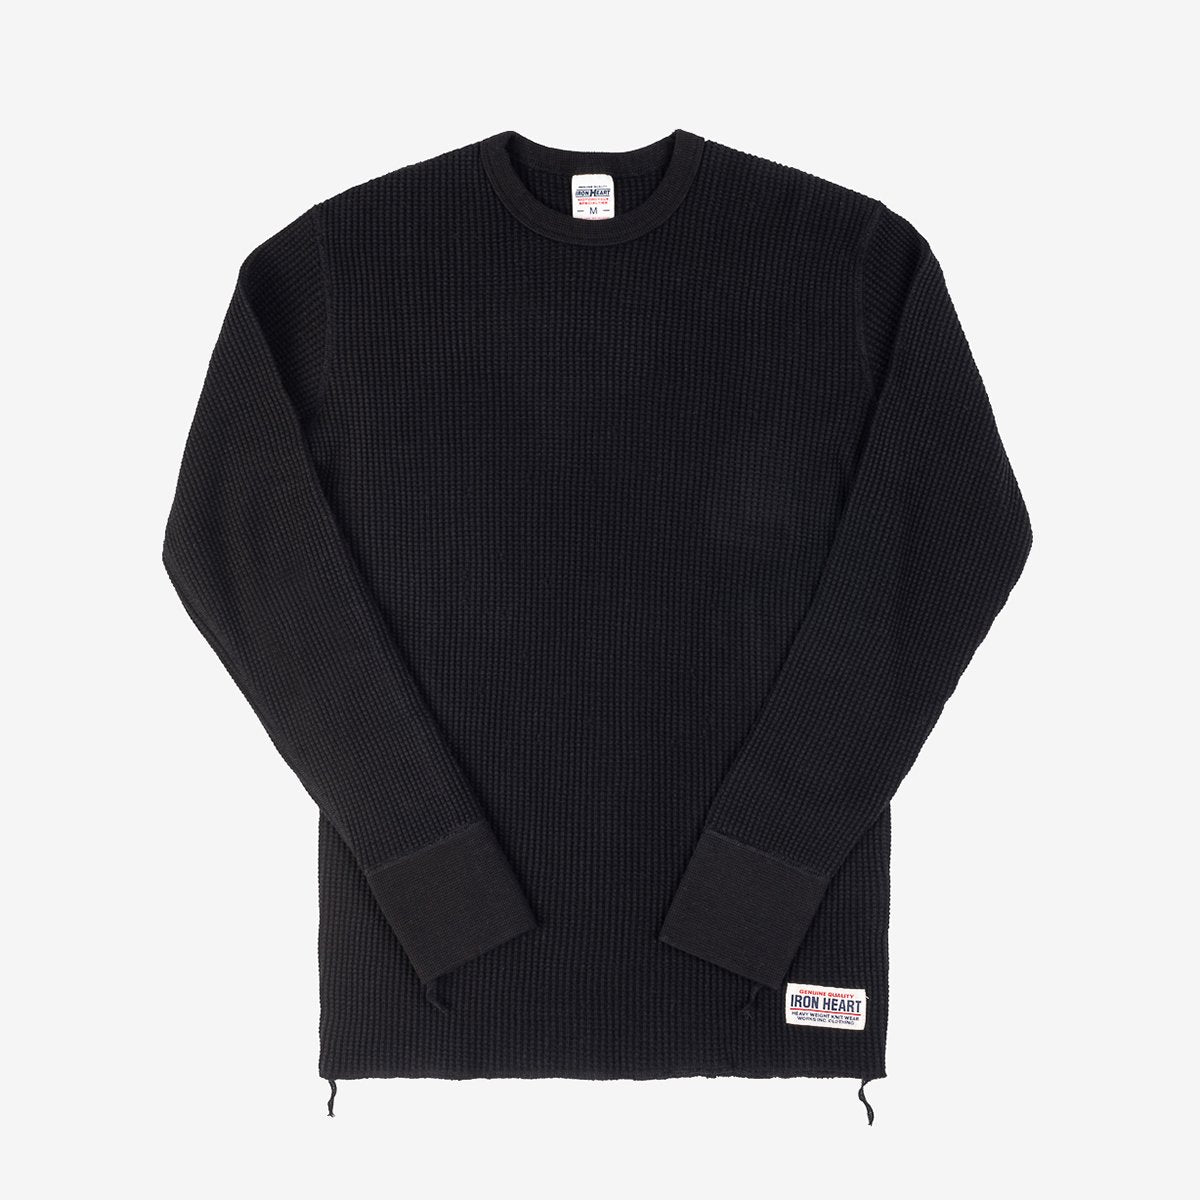 IHTL-1301-BLK Waffle Knit Long Sleeve Crew Neck Thermal Black